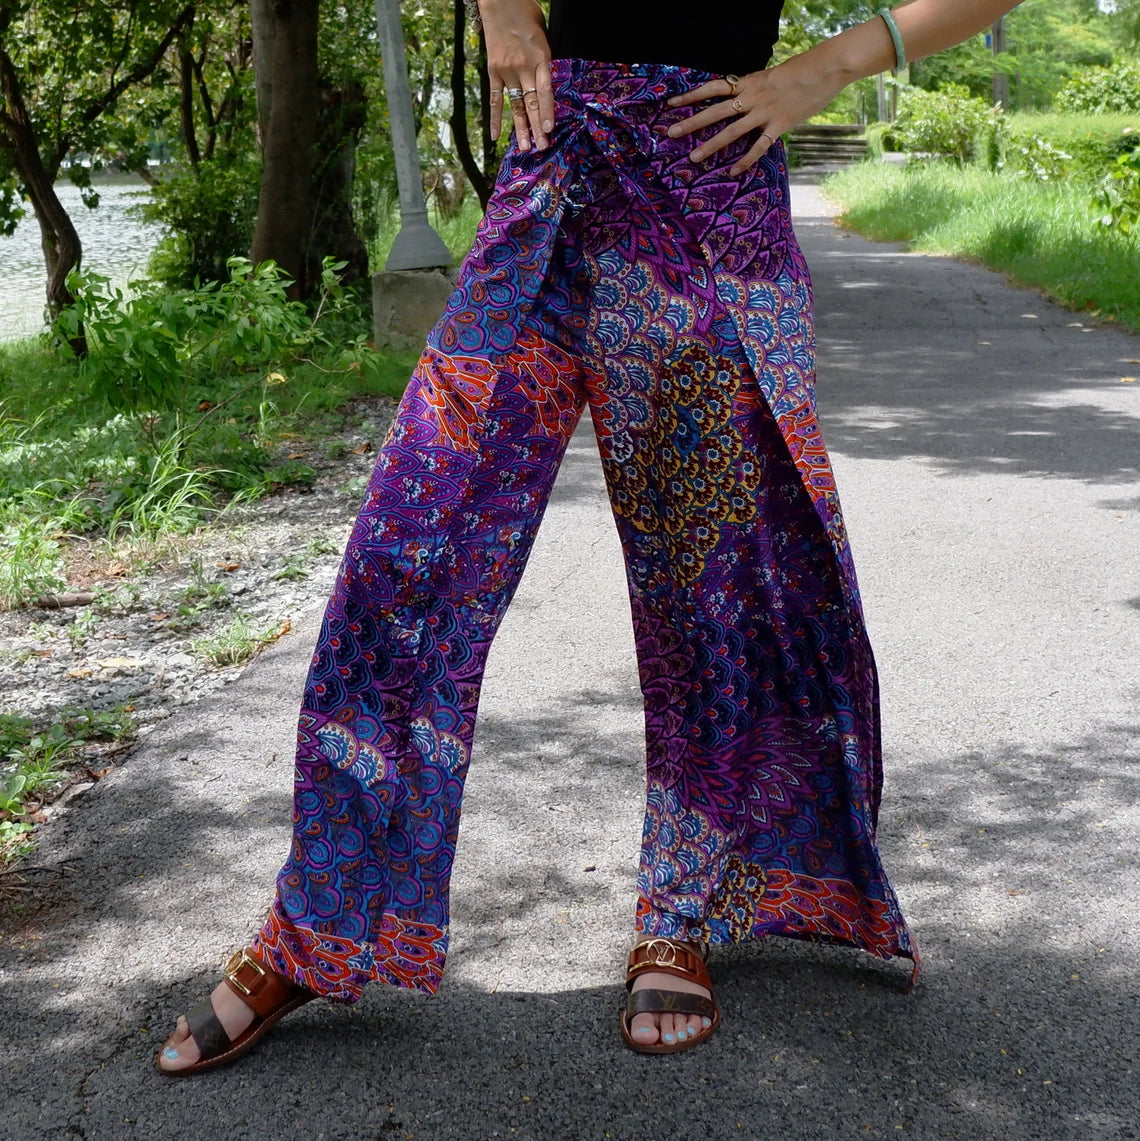 Chic boho wrap pants with a vibrant purple petals print, ideal for a fashionable and eclectic look.